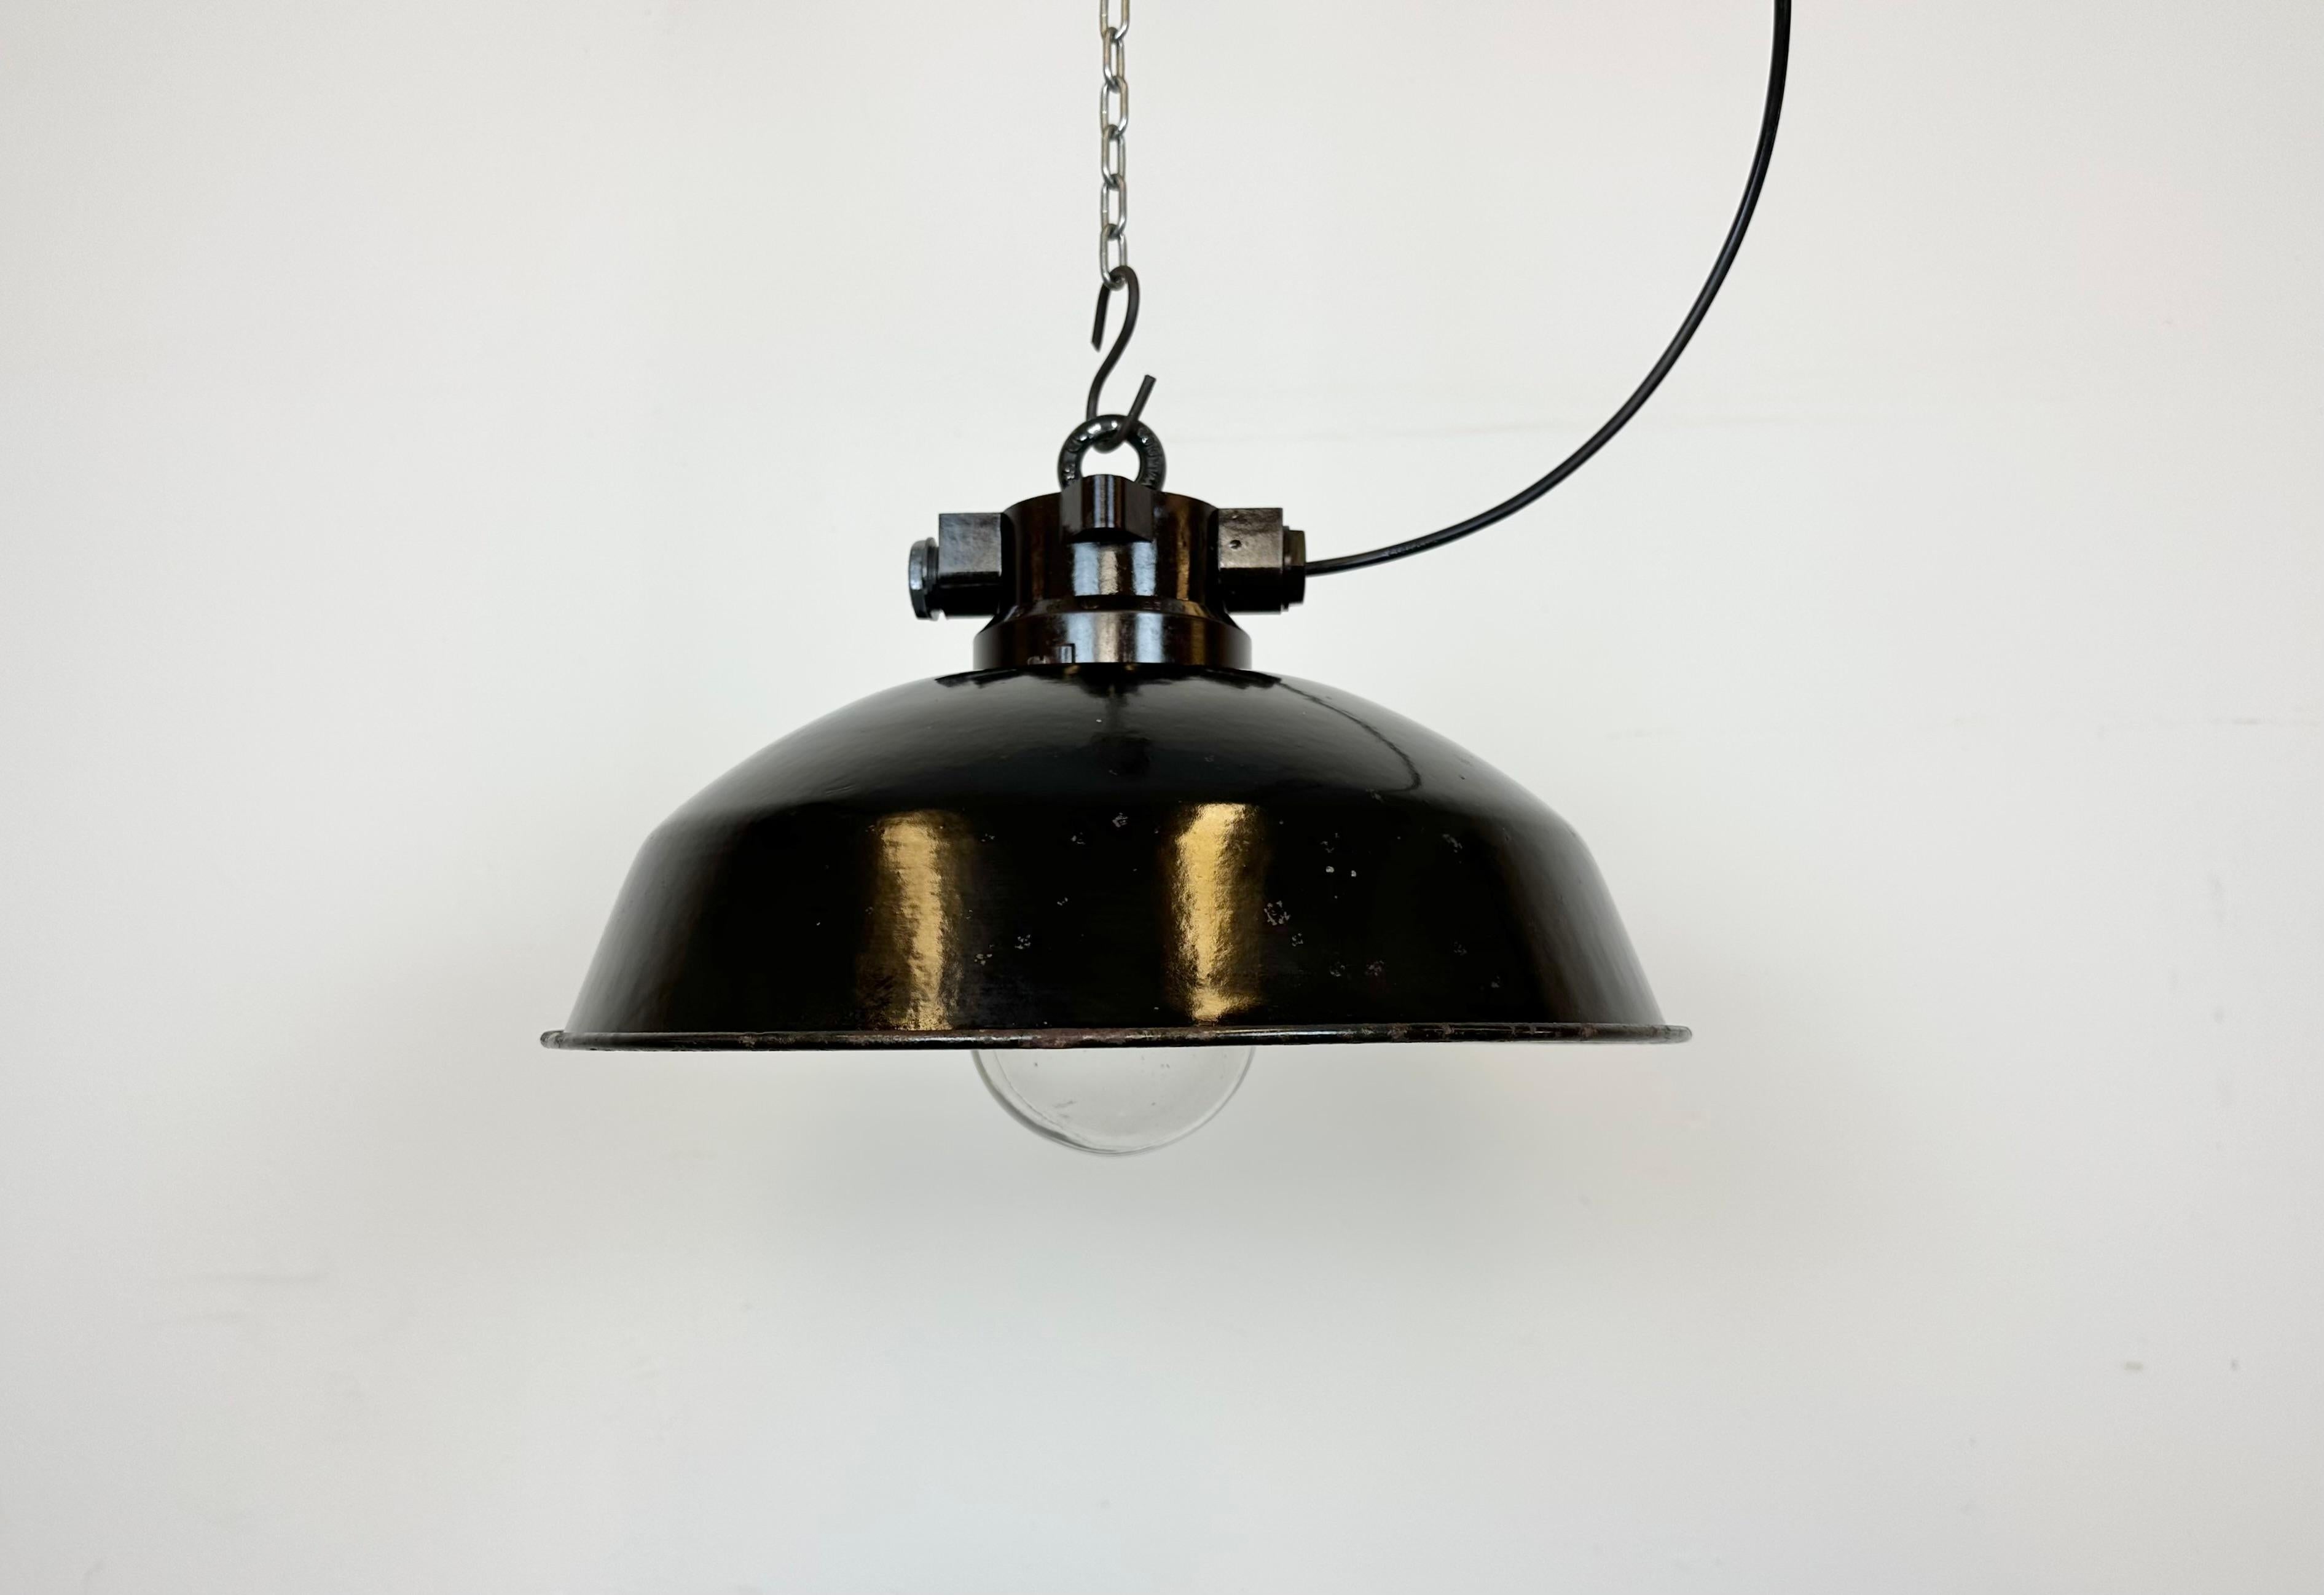 Industrial enamel hanging lamp made in former Czechoslovakia during the 1950s. It features a bakelite top, a black enamel shade with white enamel interior an a clear glass cover. New  socket requires standard E 27/ E 26 light bulbs. New wire. The